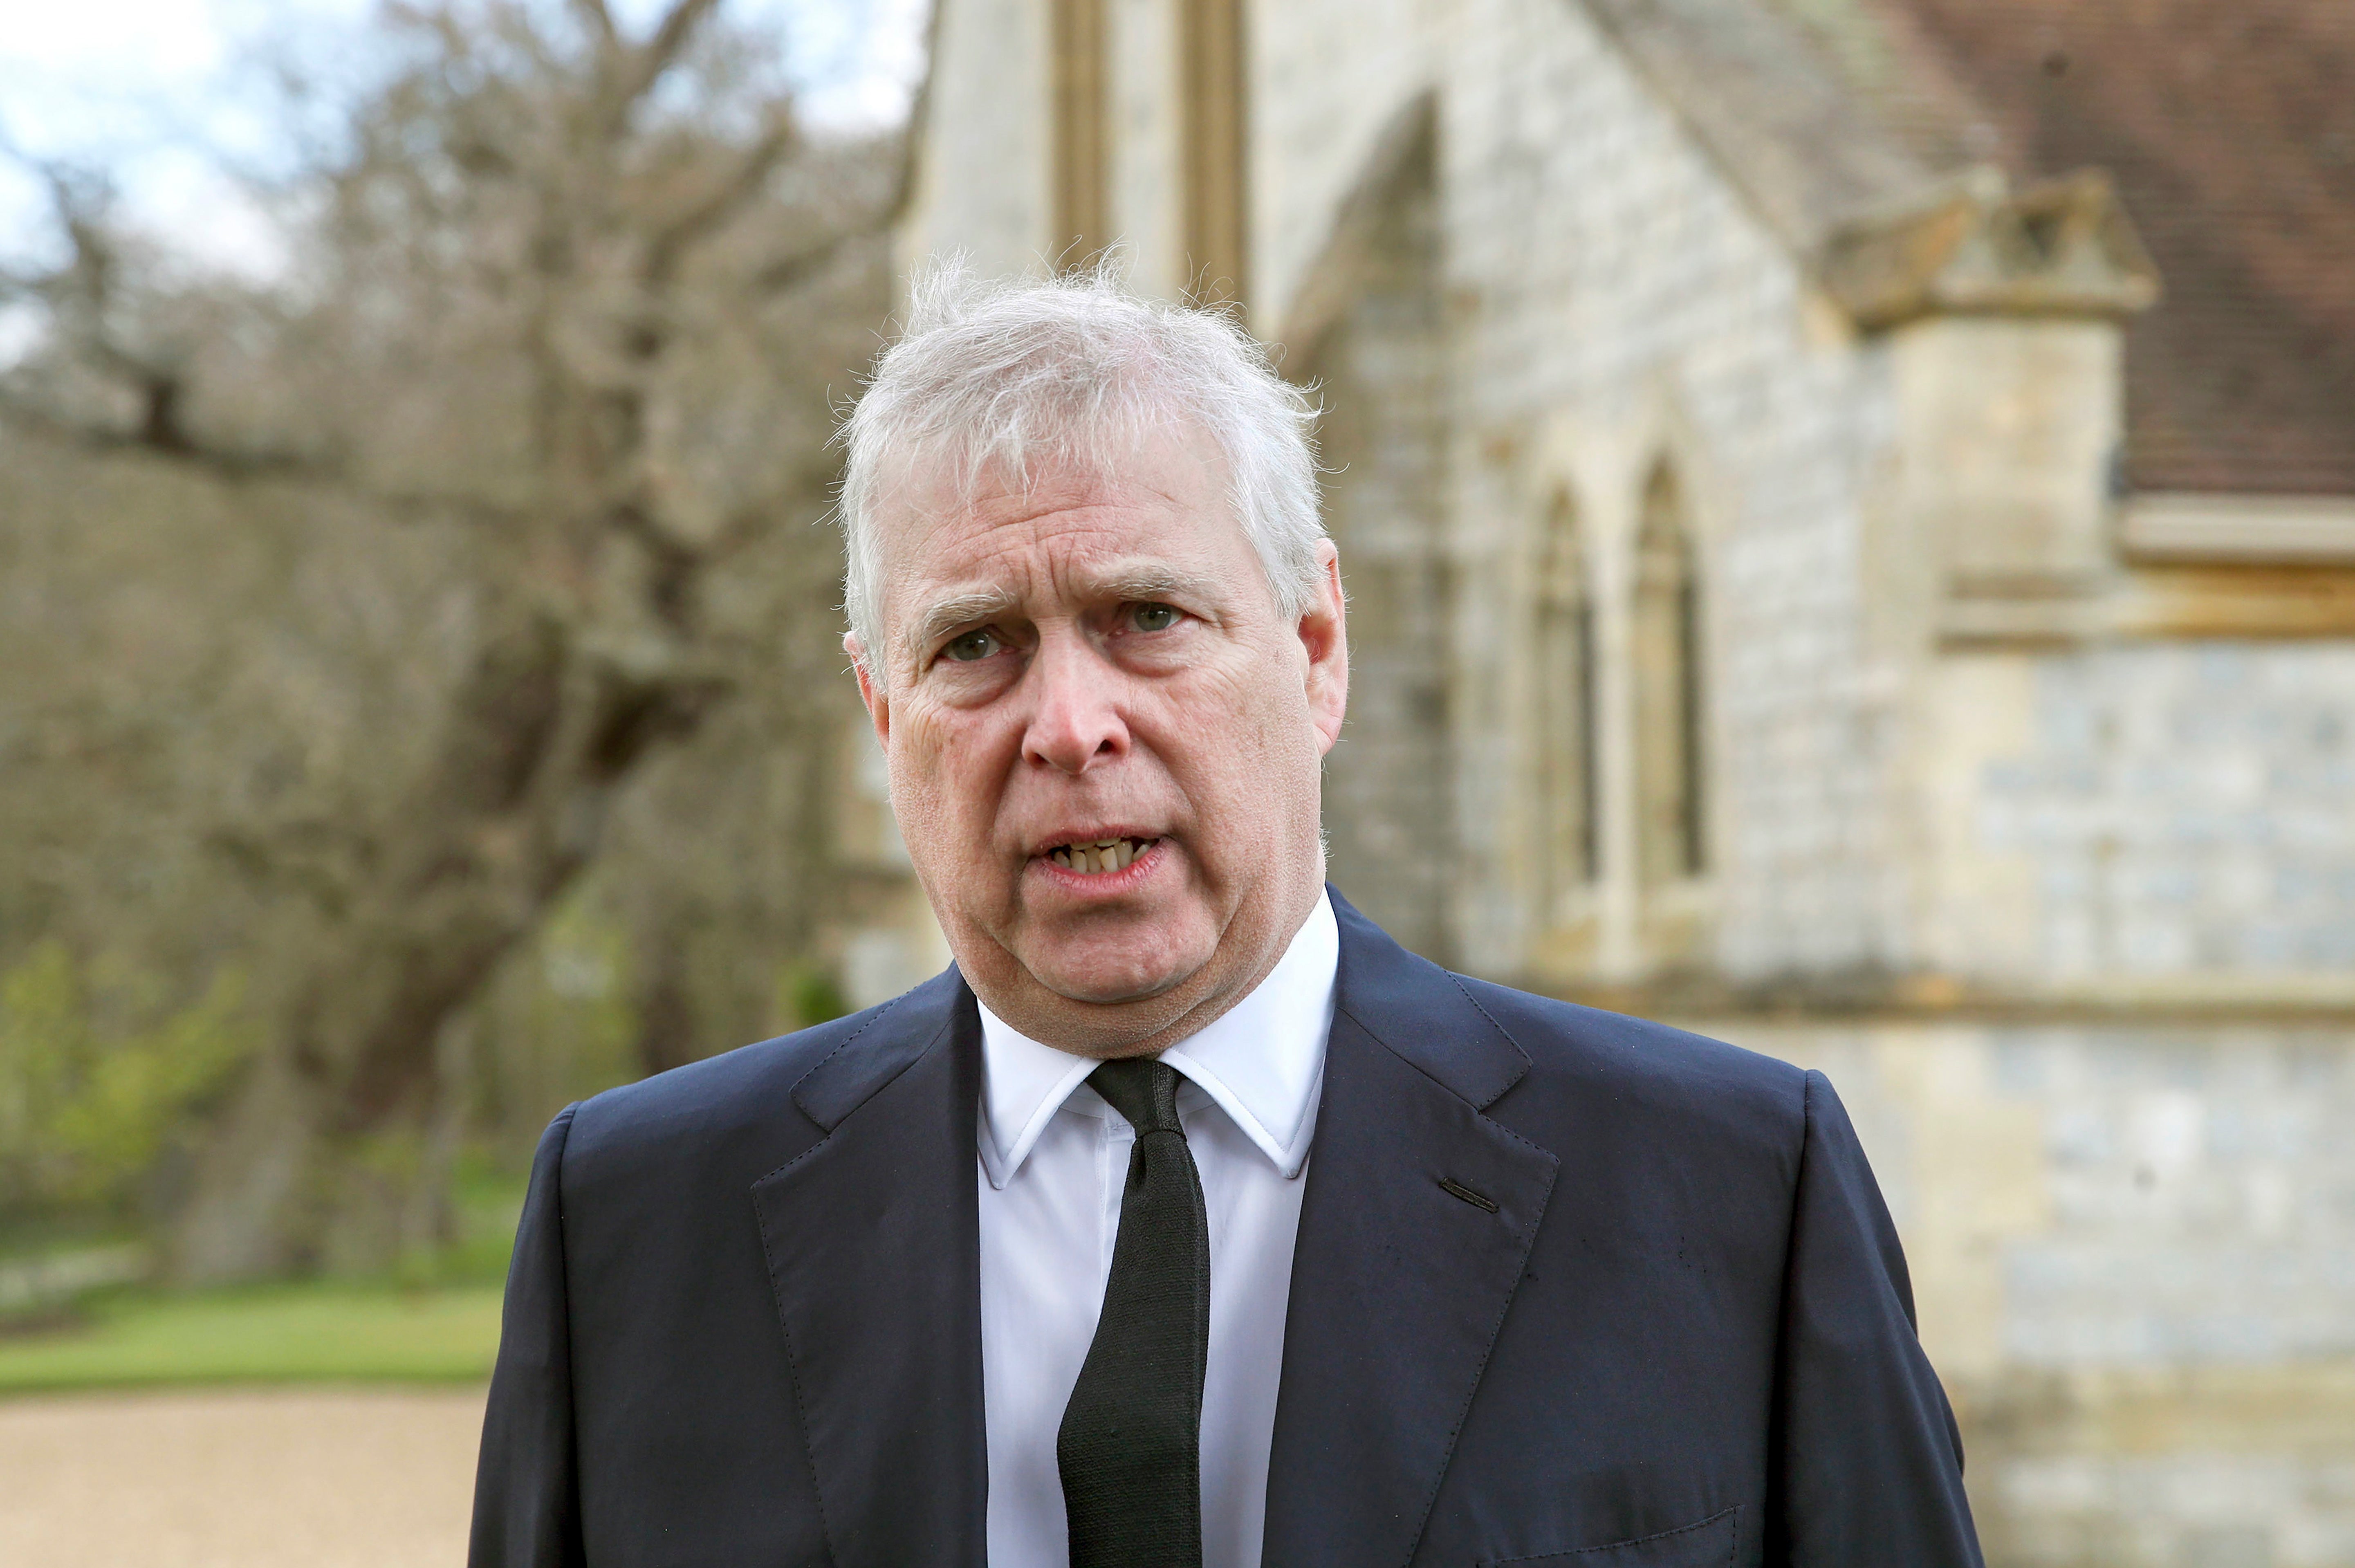 Prince Andrew has consistently denied all accusations of sexual abuse